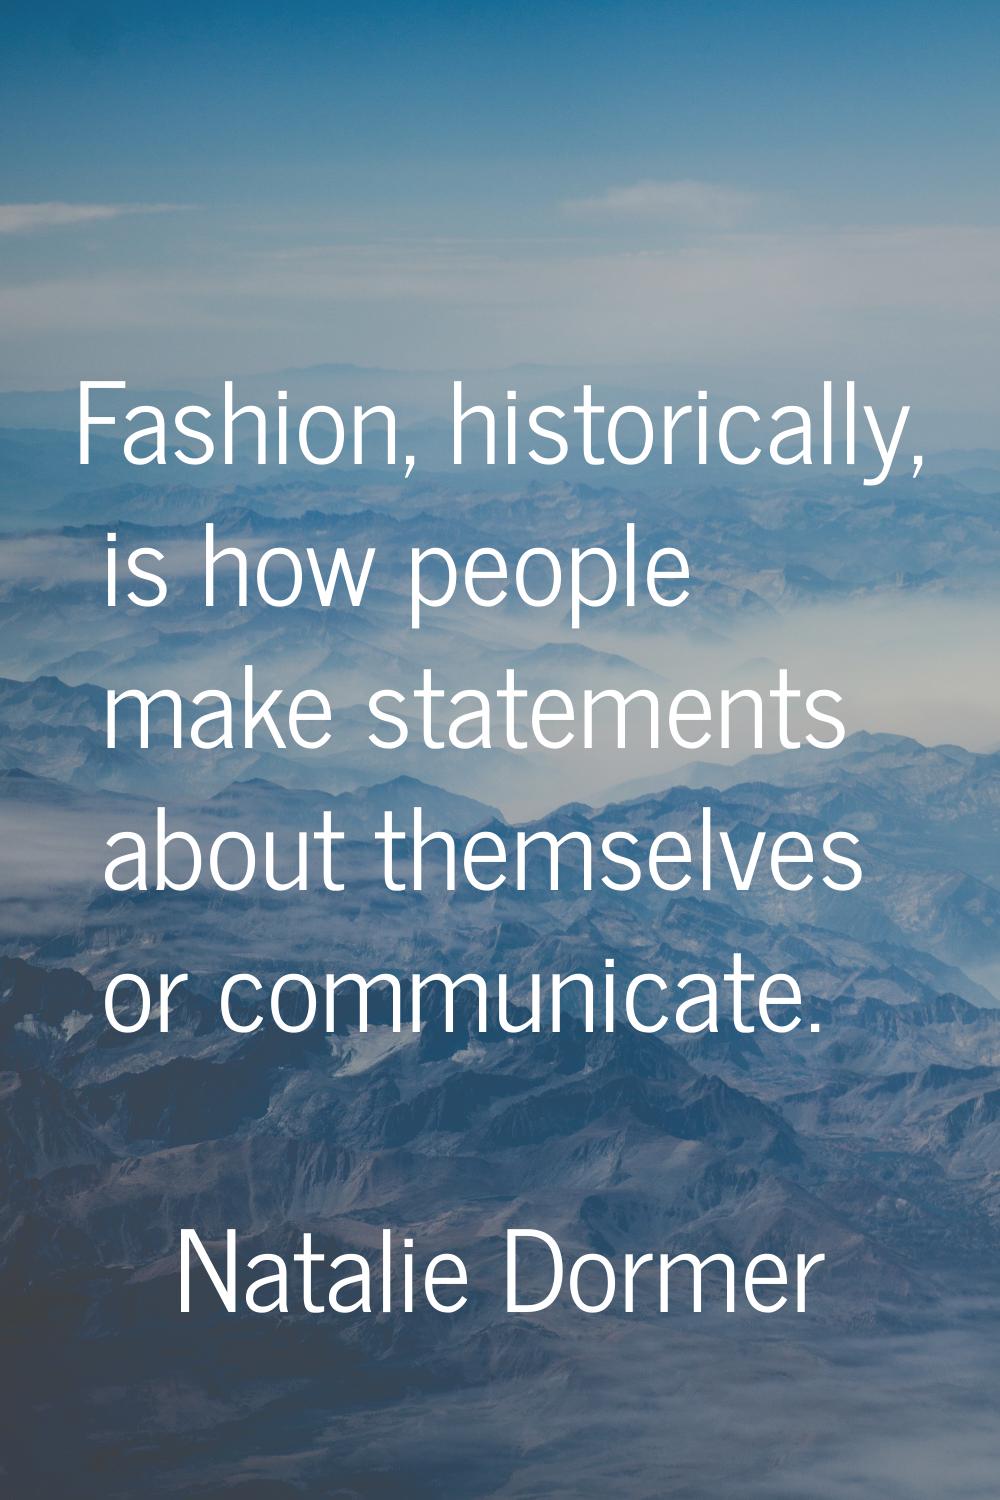 Fashion, historically, is how people make statements about themselves or communicate.